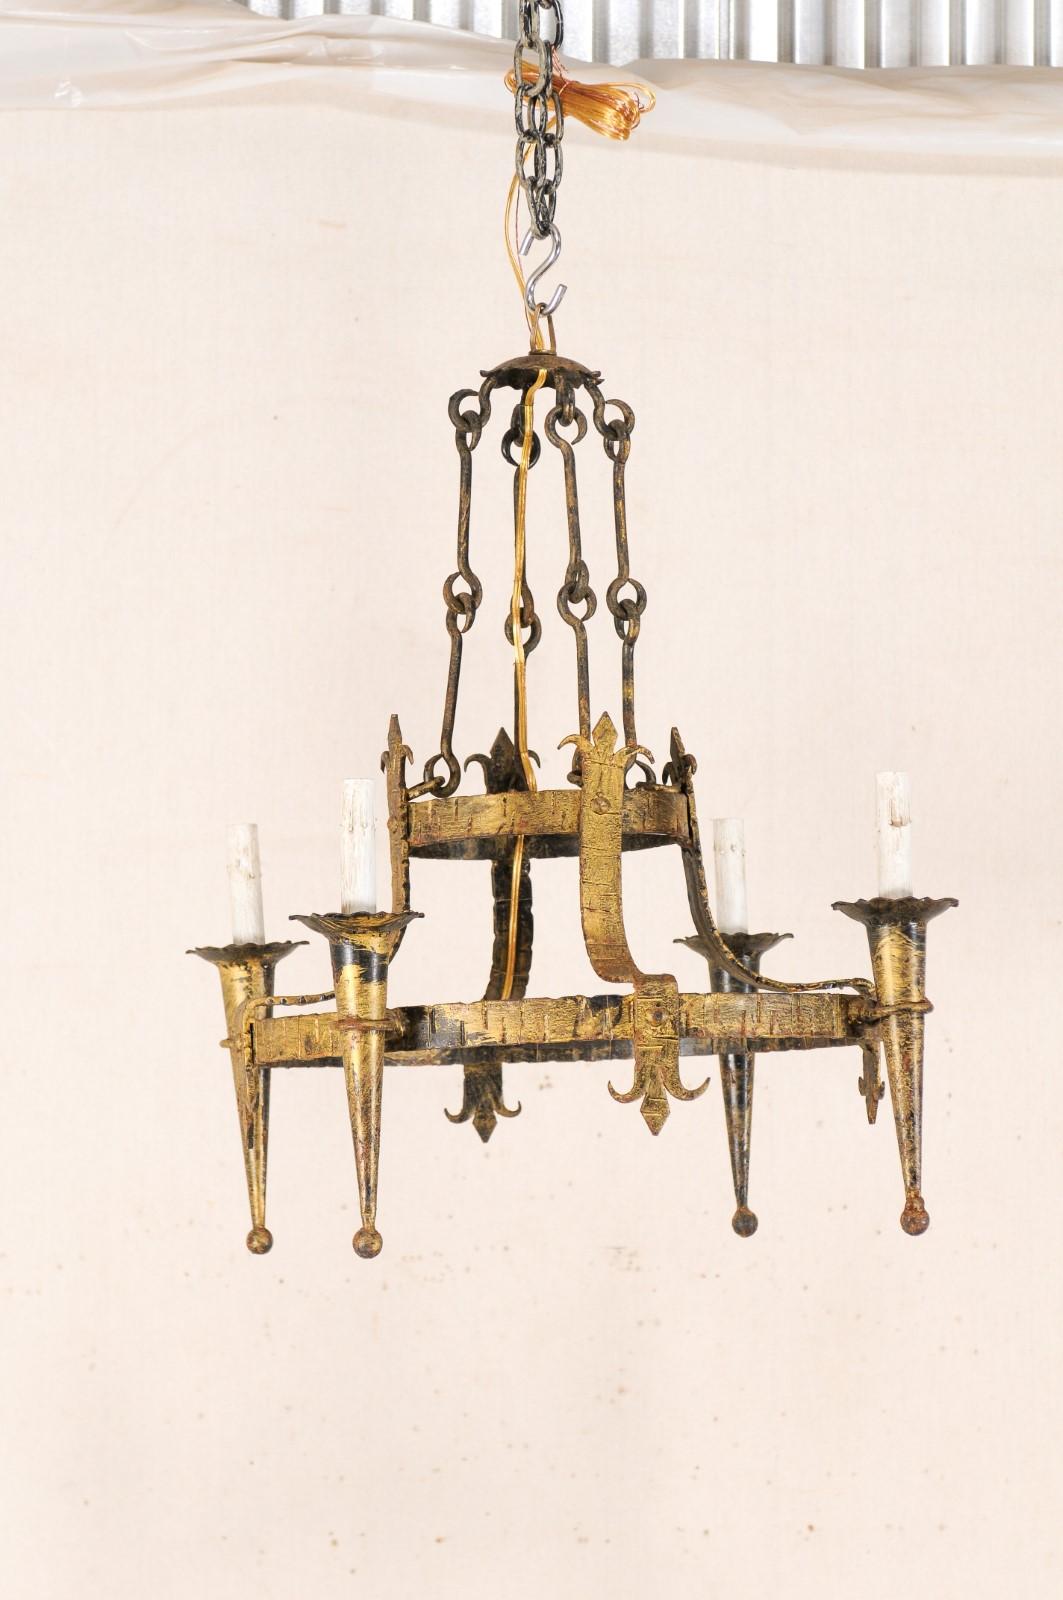 A French double-ringed gold-tone iron chandelier with four lights and Fleur di Lis motif from the mid-20th century. This mid-20th century chandelier from France features a double ringed central gallery, with the larger lower ring supporting four